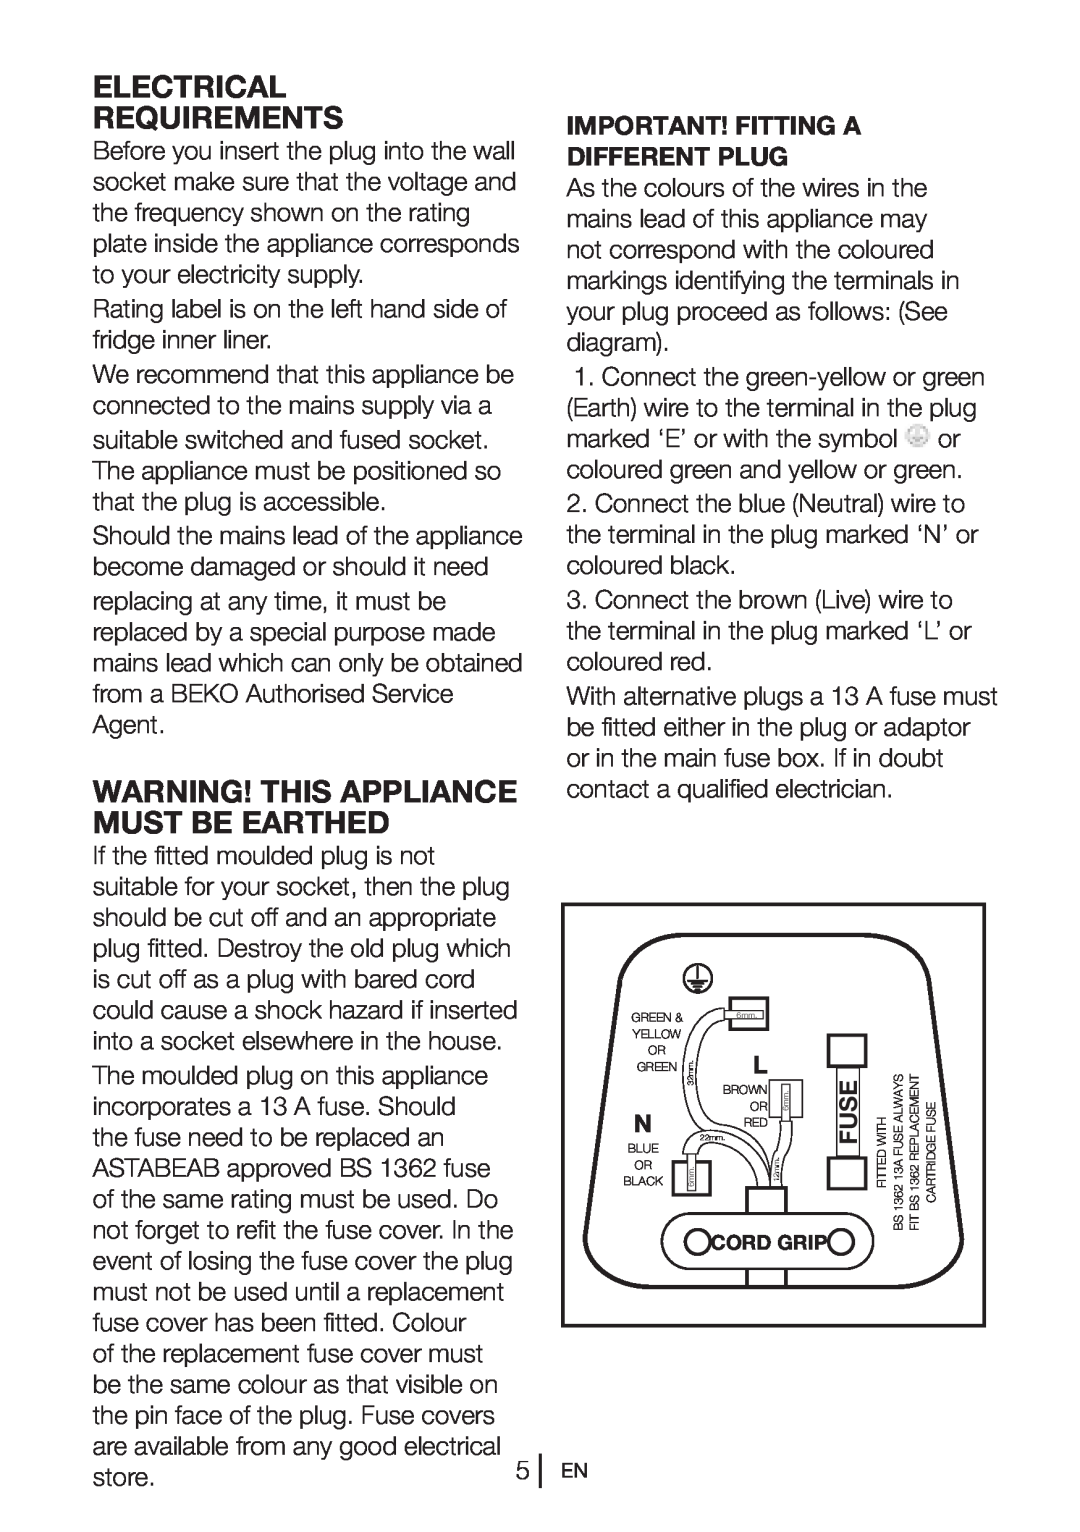 Beko CF 5013 APW Electrical Requirements, Warning! This Appliance Must Be Earthed, Important! Fitting A Different Plug 